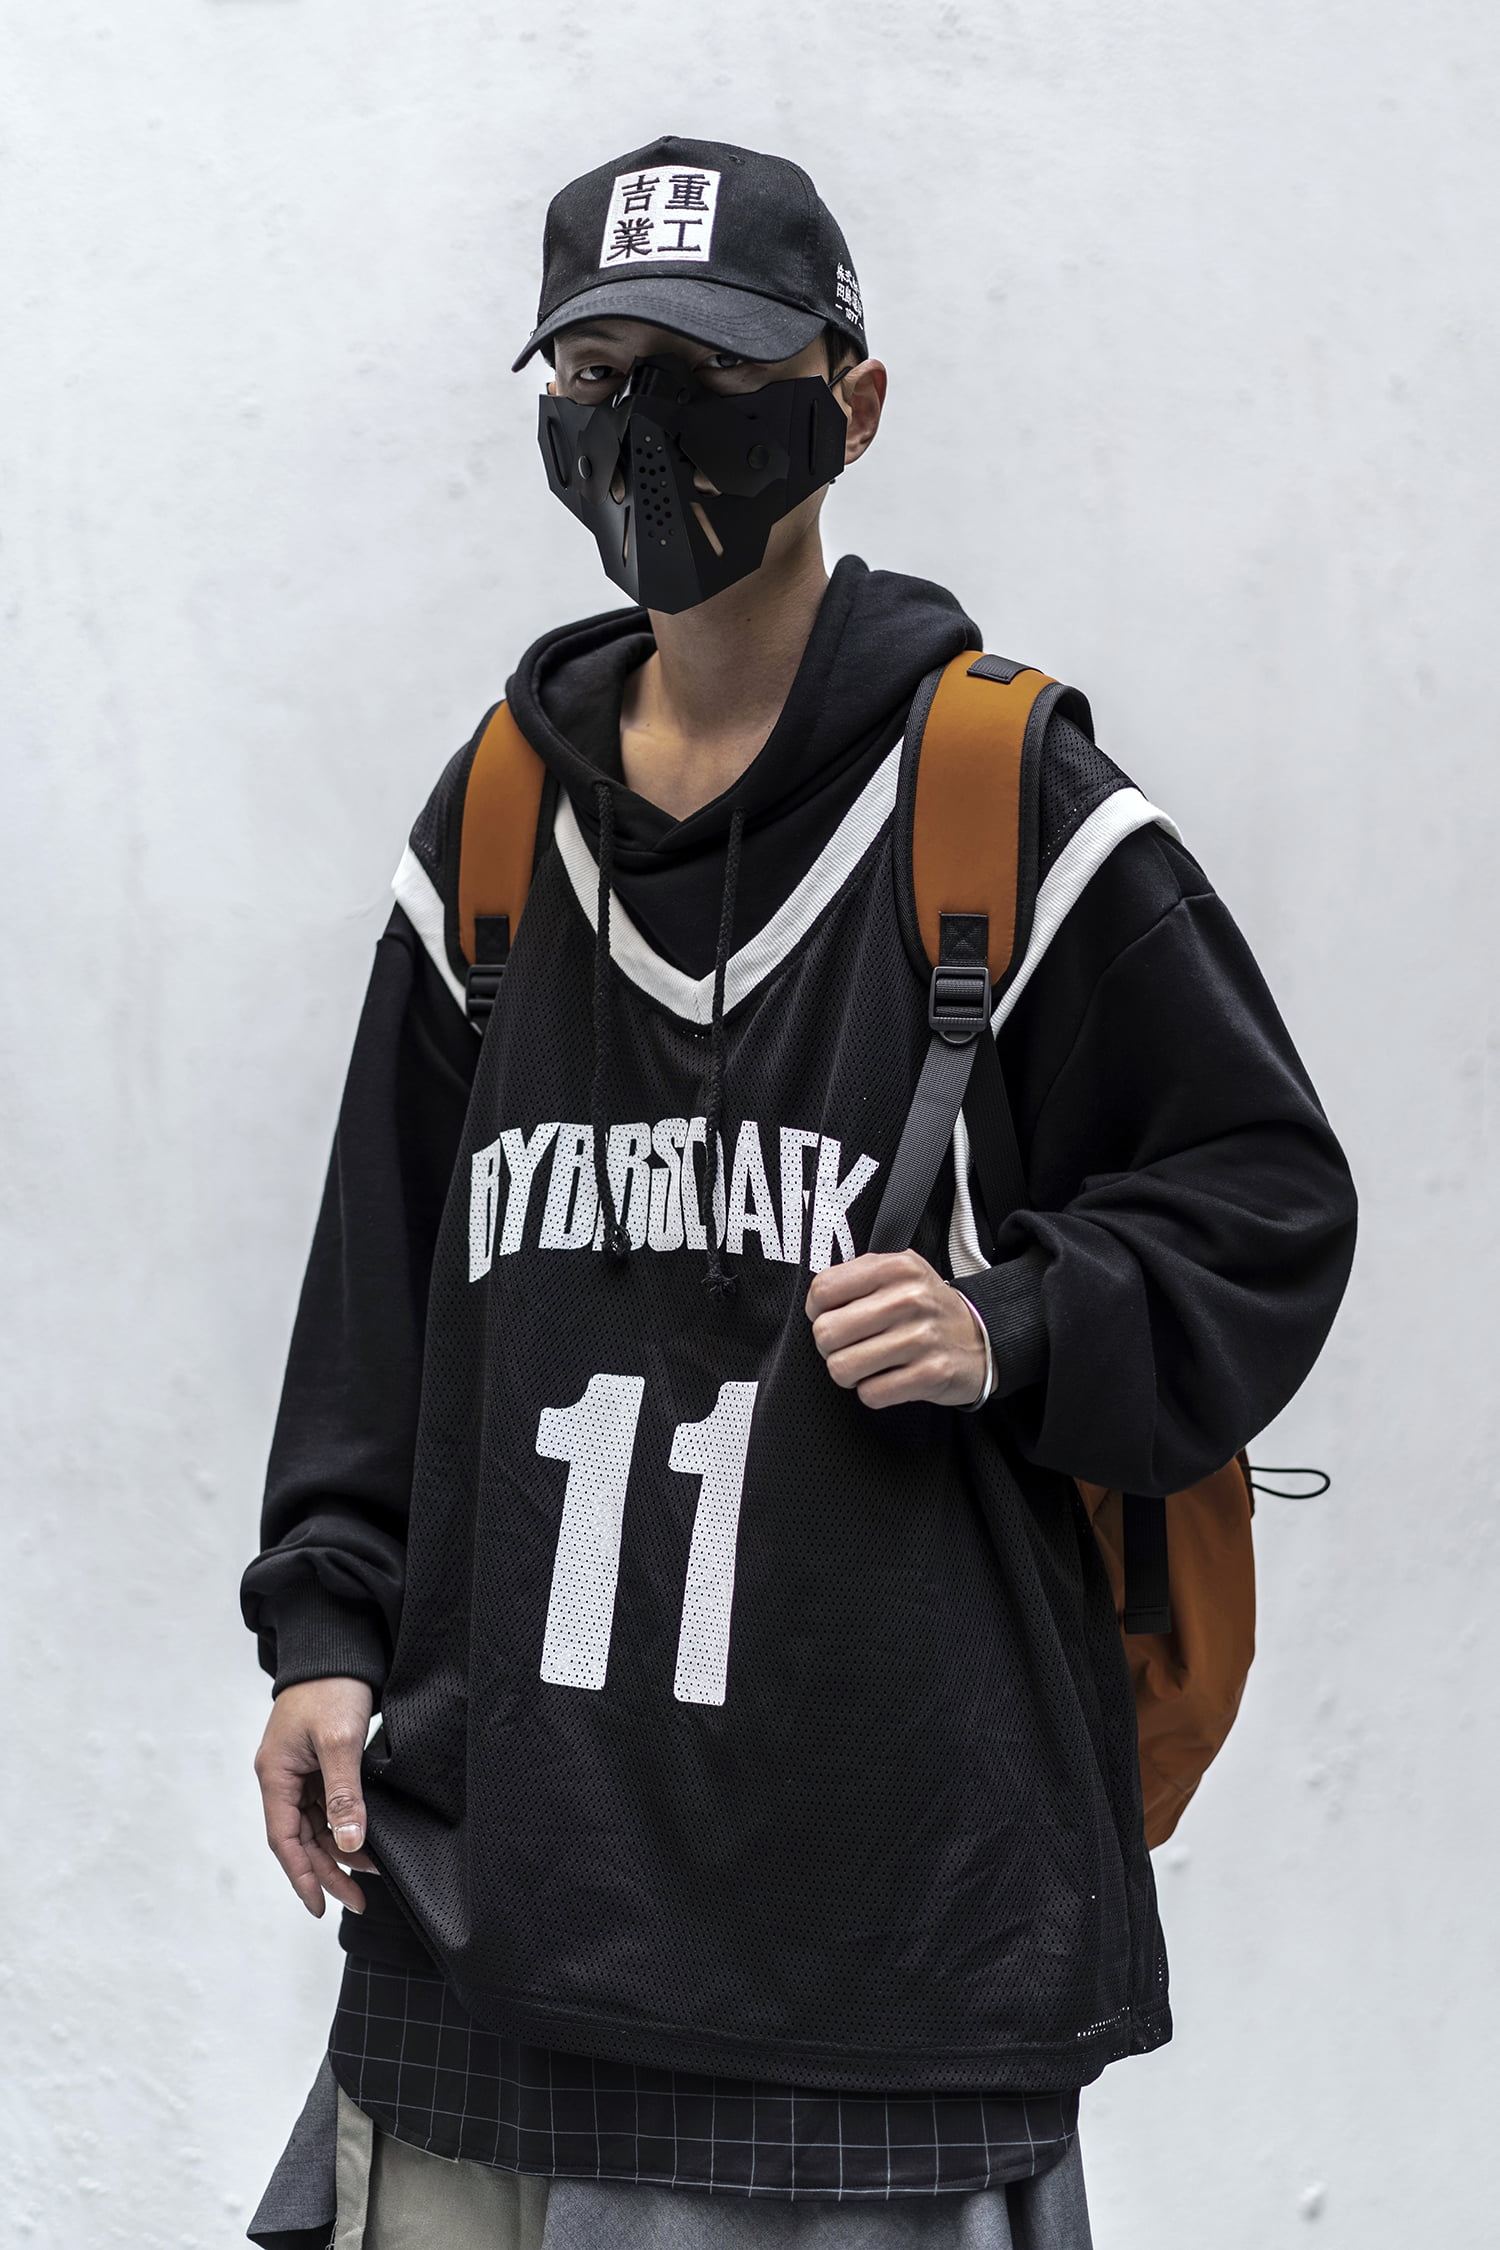 hoodie and basketball jersey